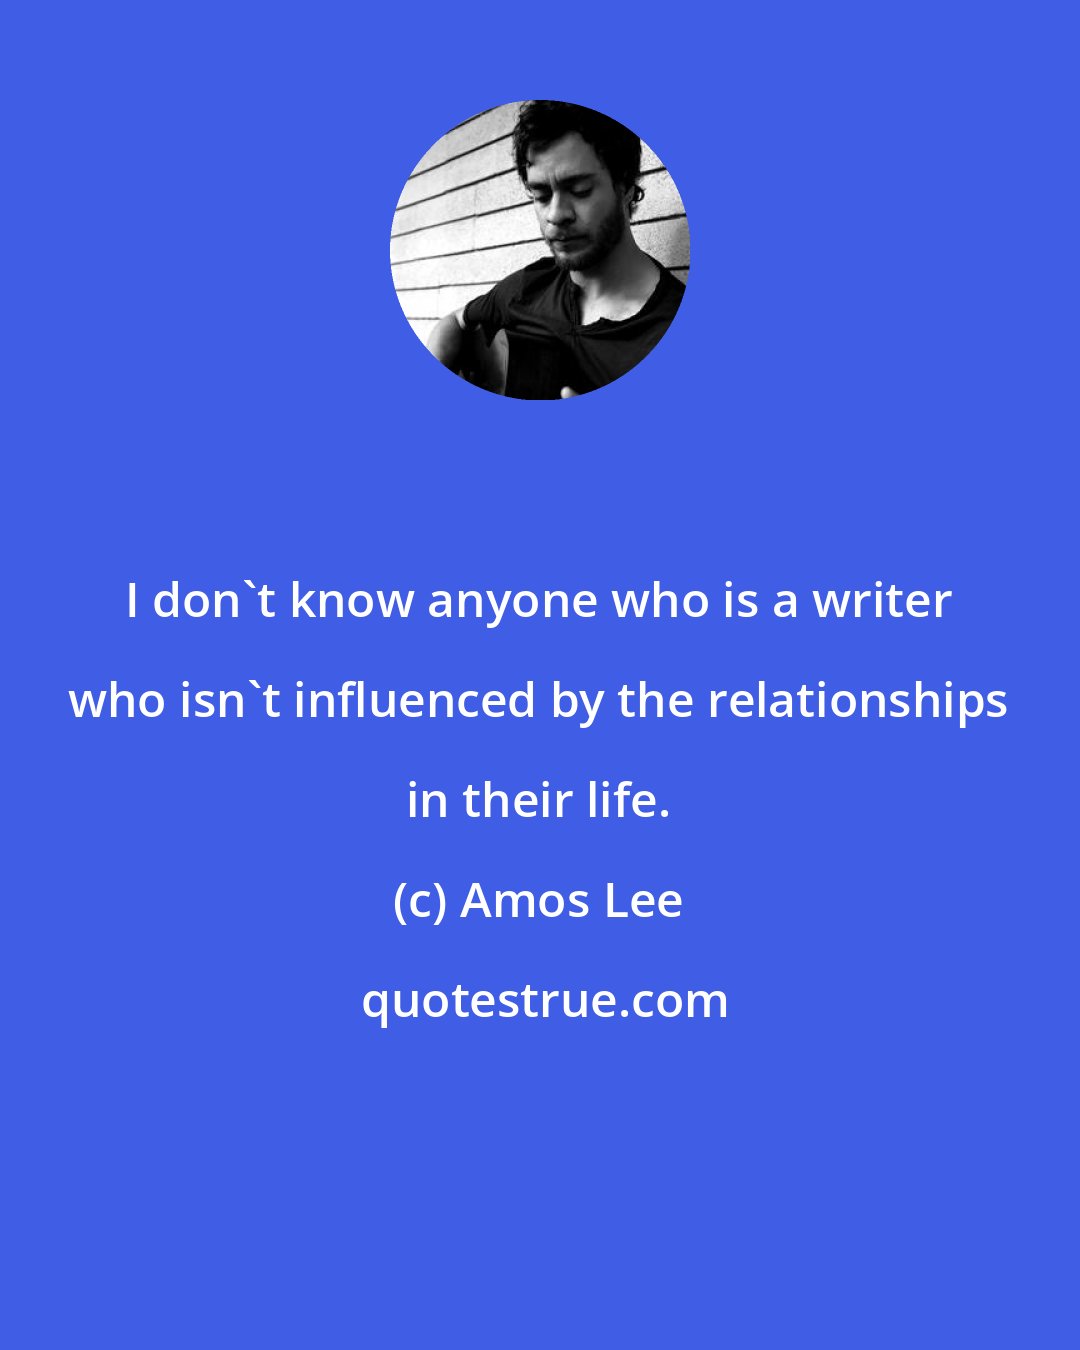 Amos Lee: I don't know anyone who is a writer who isn't influenced by the relationships in their life.